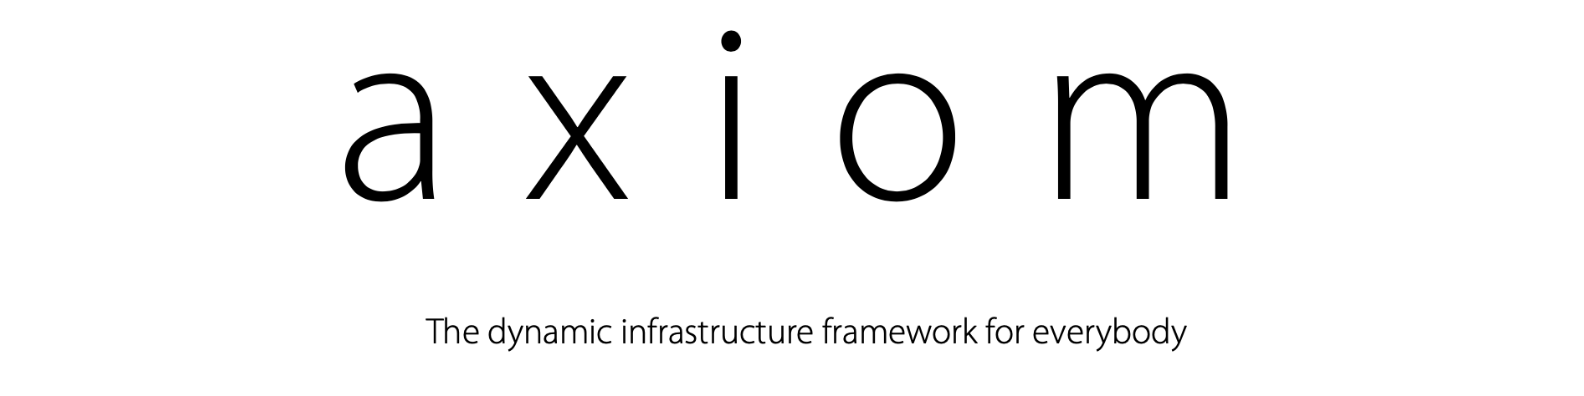 banner for pry0cc/axiom - reads 'the dynamic infrastructure framework for everybody'